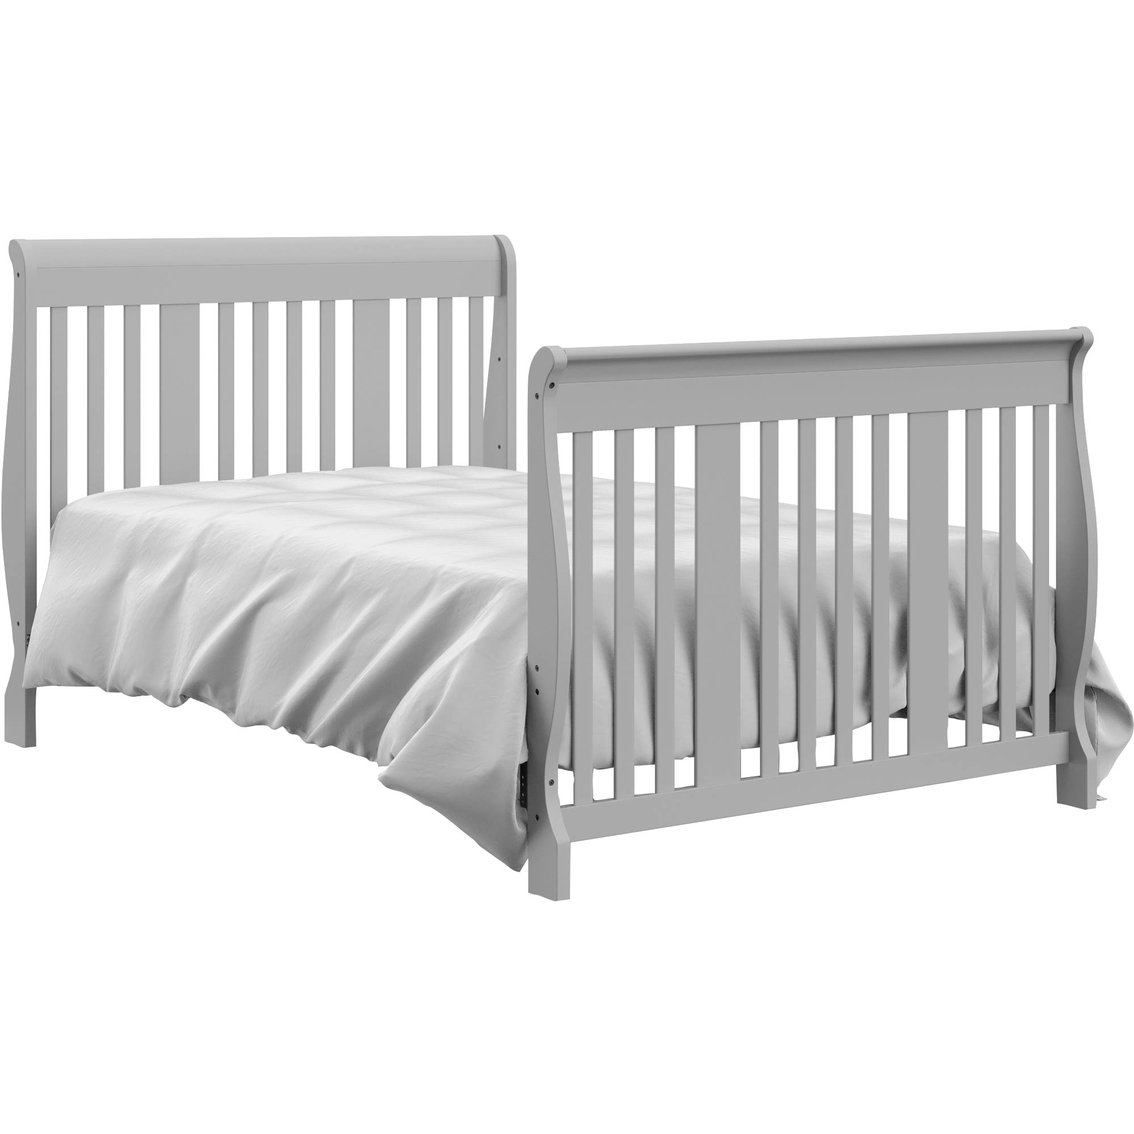 Storkcraft Portofino 4 in 1 Convertible Crib and Changer - Image 5 of 9